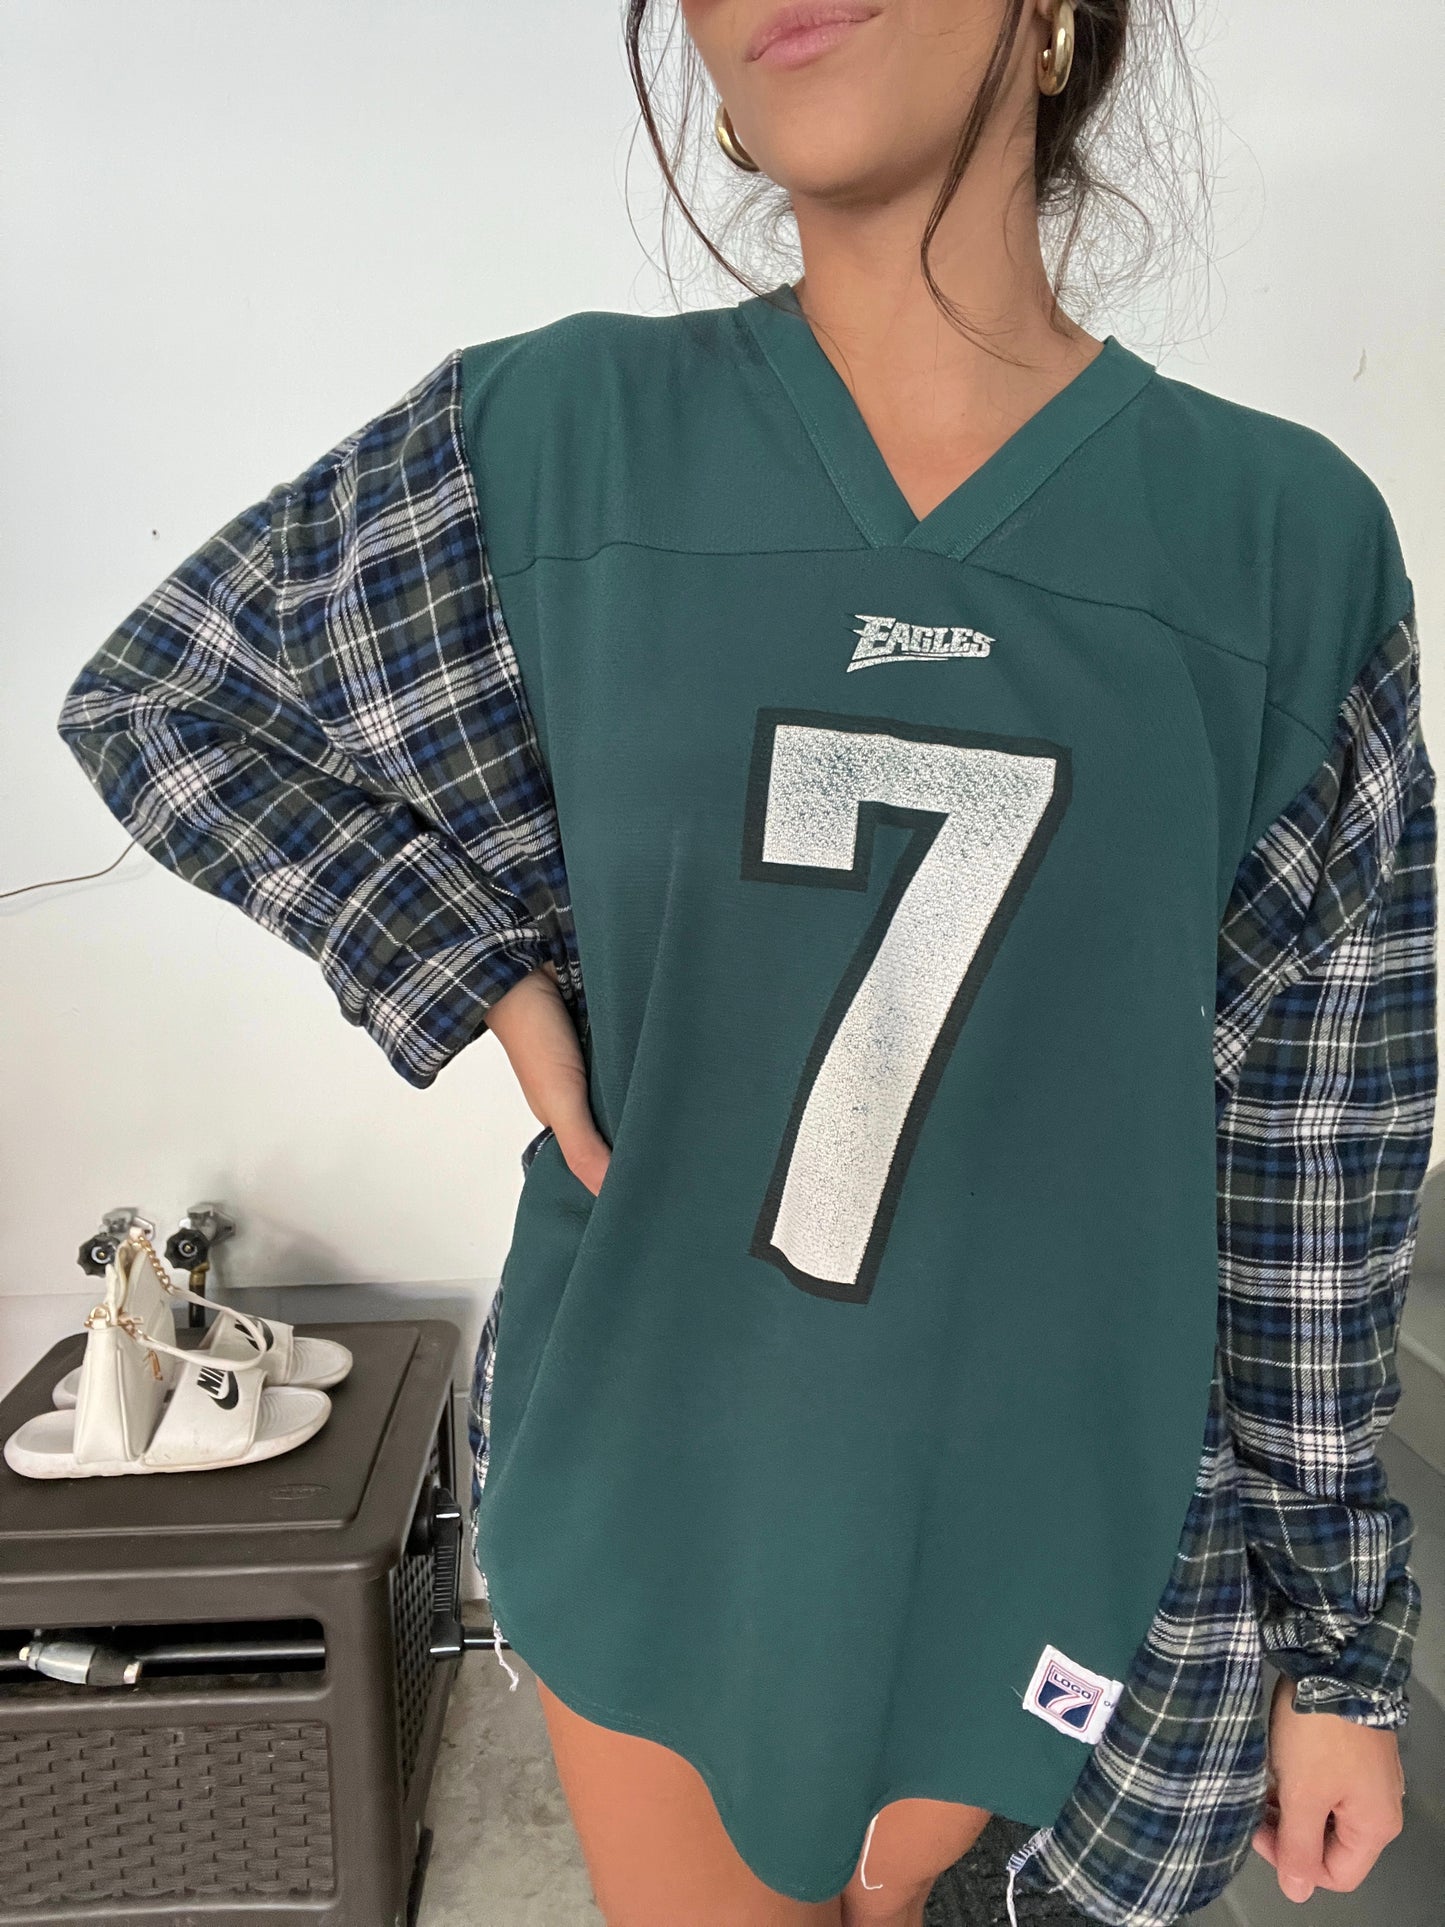 #18 HOYING EAGLES JERSEY X FLANNEL